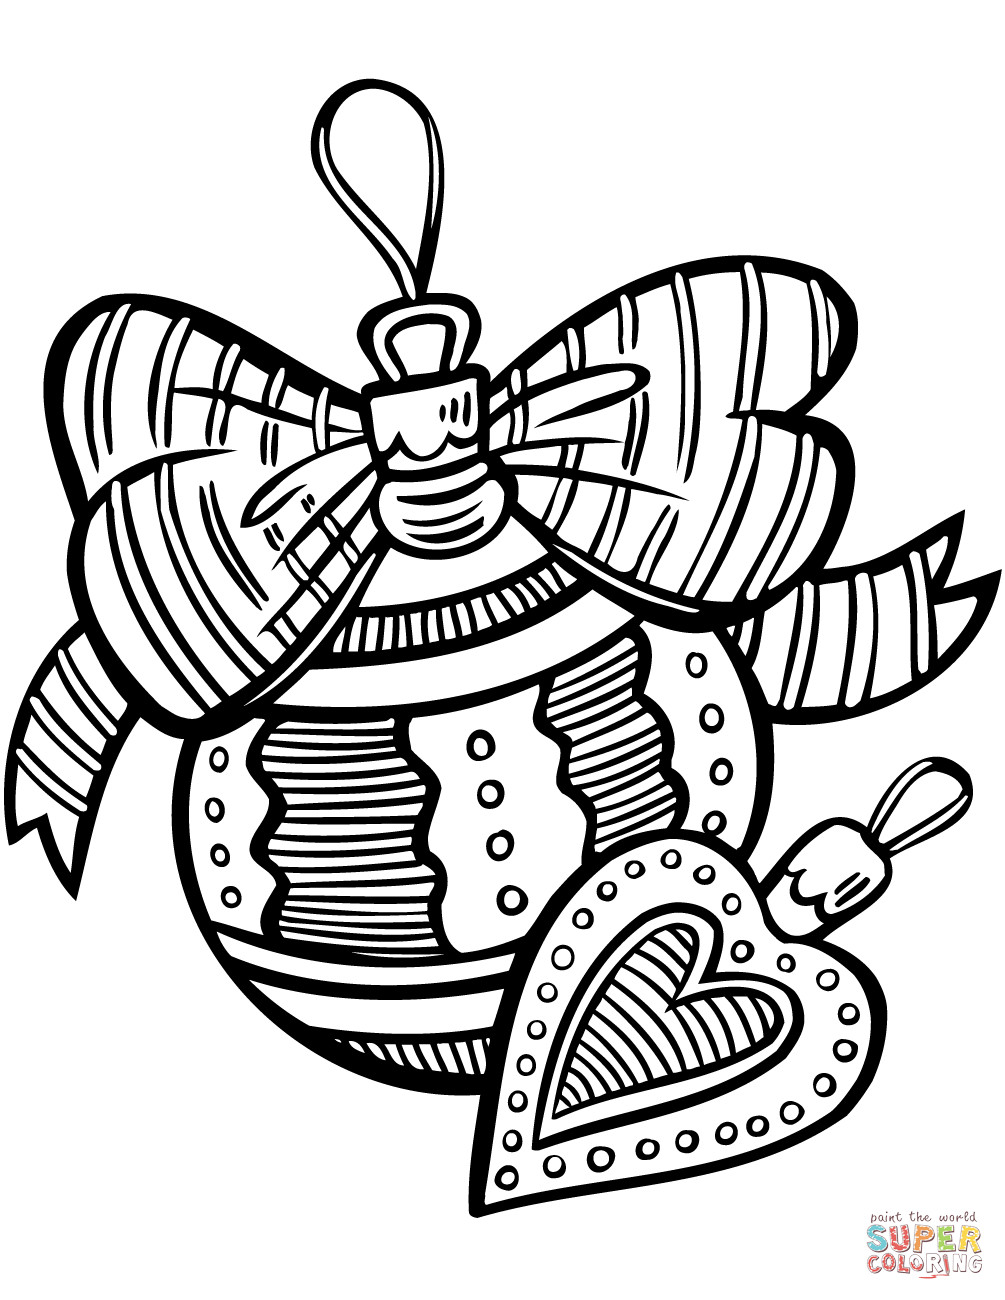 Christmas Ornament Coloring Pages
 Christmas Ornaments coloring page